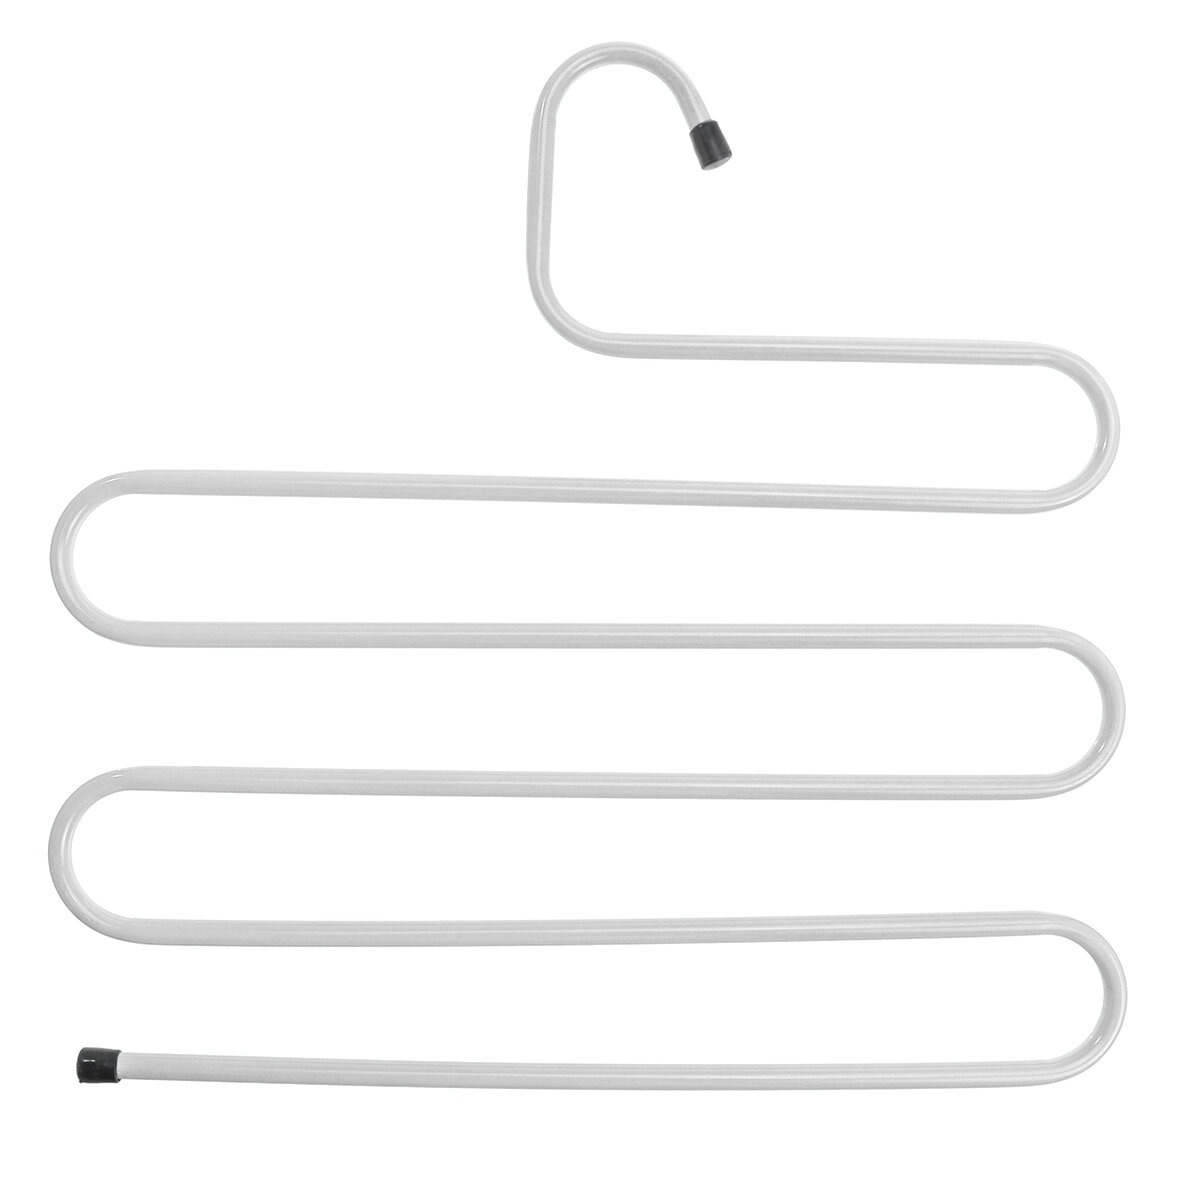 Clothes Rack Pants Hanger Closet Trousers Multi Layer Stainless Steel Hangers